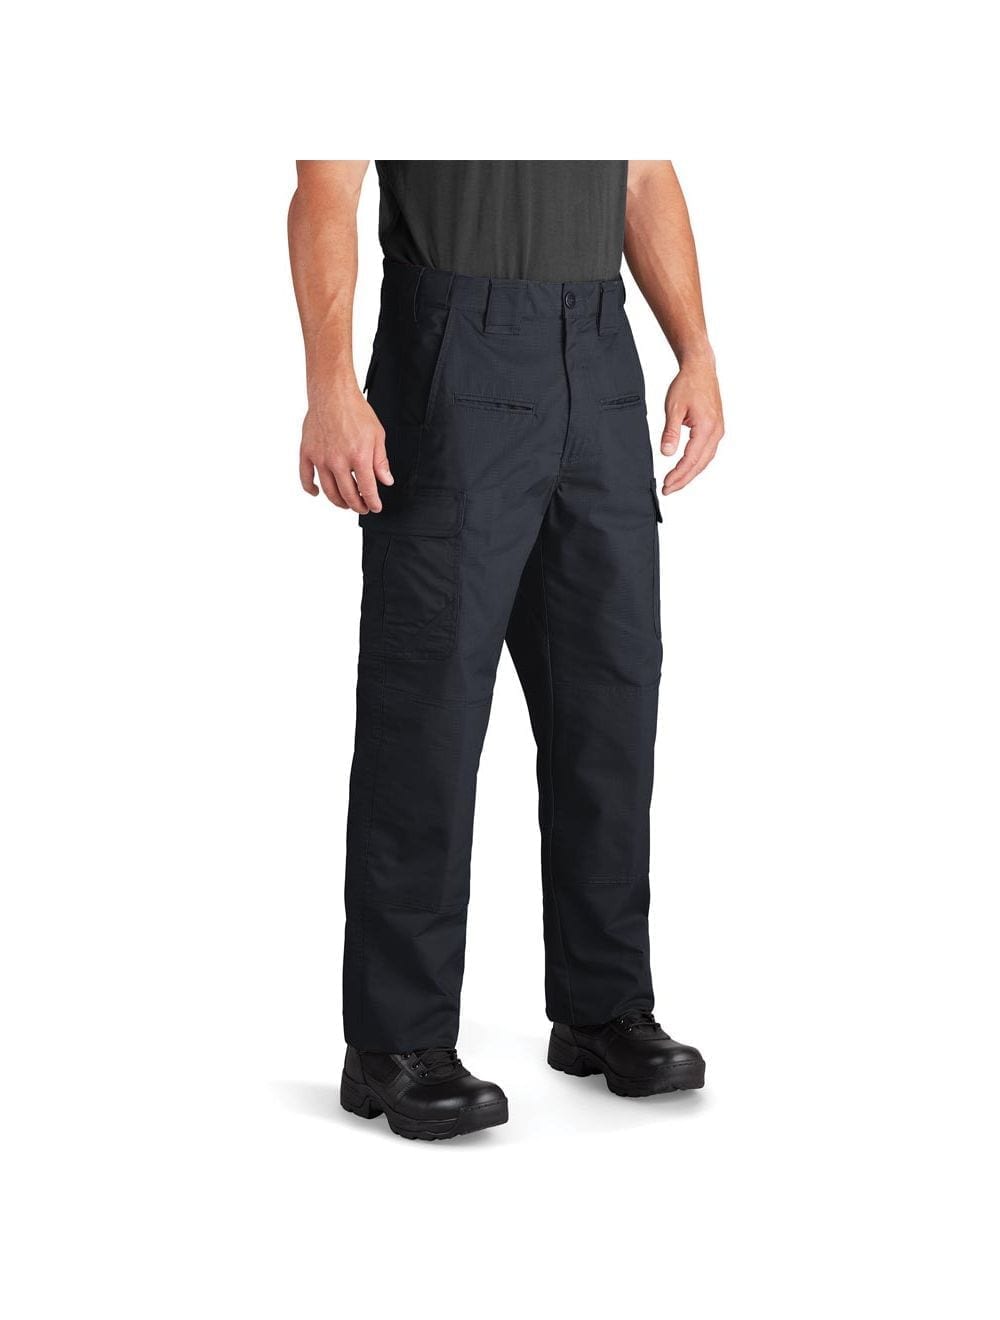 How Should Tactical Pants Fit  Operators guide to Tactical Clothing  UF  PRO